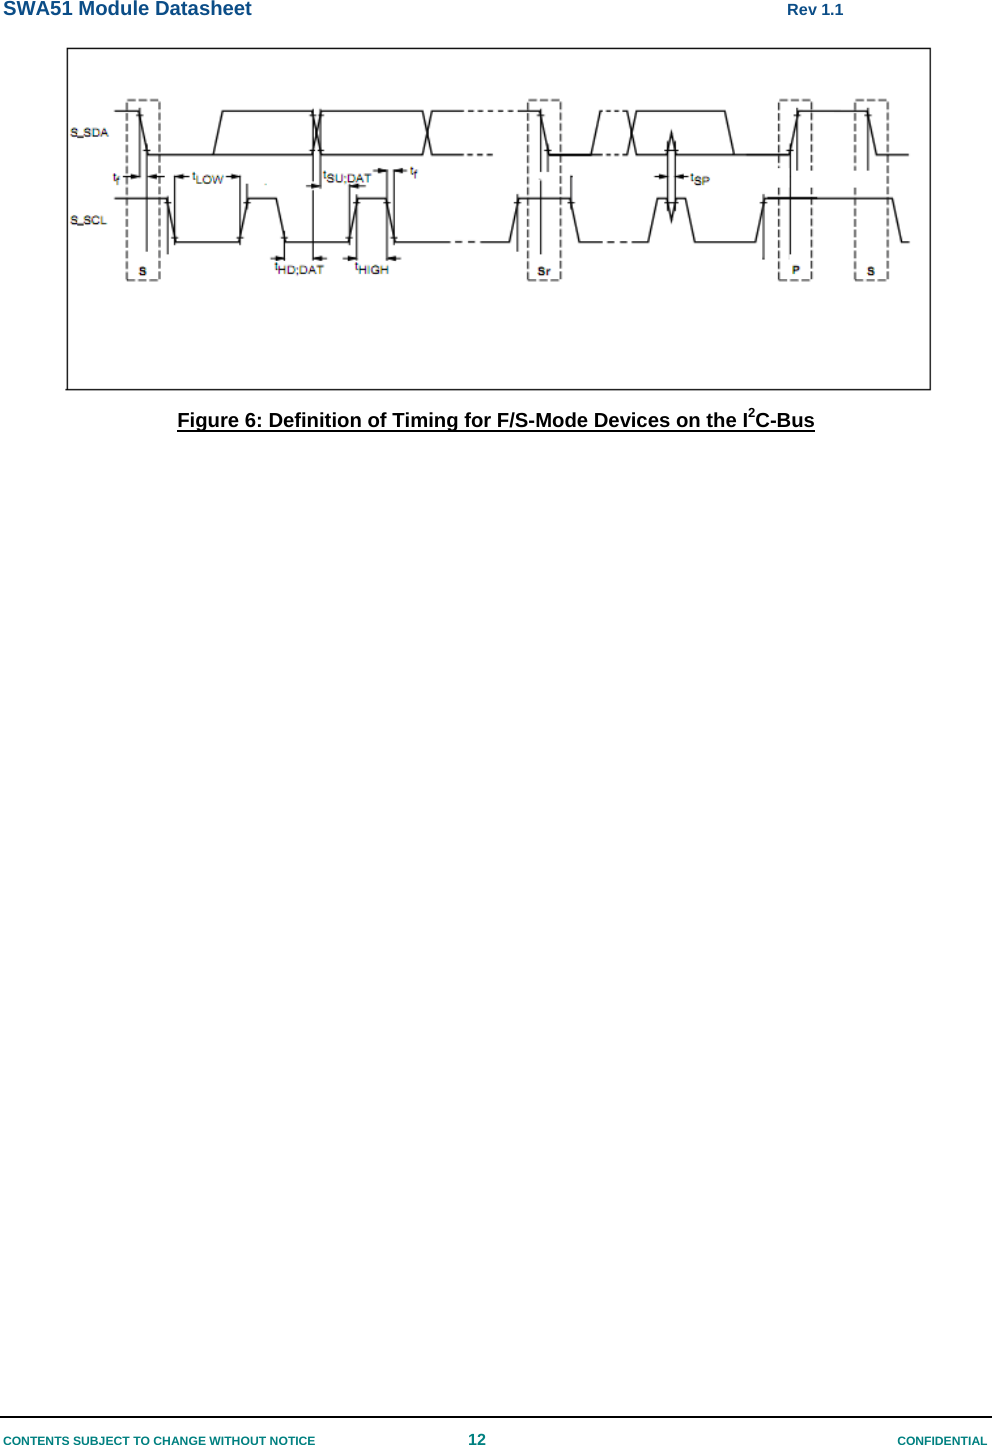 SWA51 Module Datasheet Rev 1.1 CONTENTS SUBJECT TO CHANGE WITHOUT NOTICE 12 CONFIDENTIAL  Figure 6: Definition of Timing for F/S-Mode Devices on the I2C-Bus 